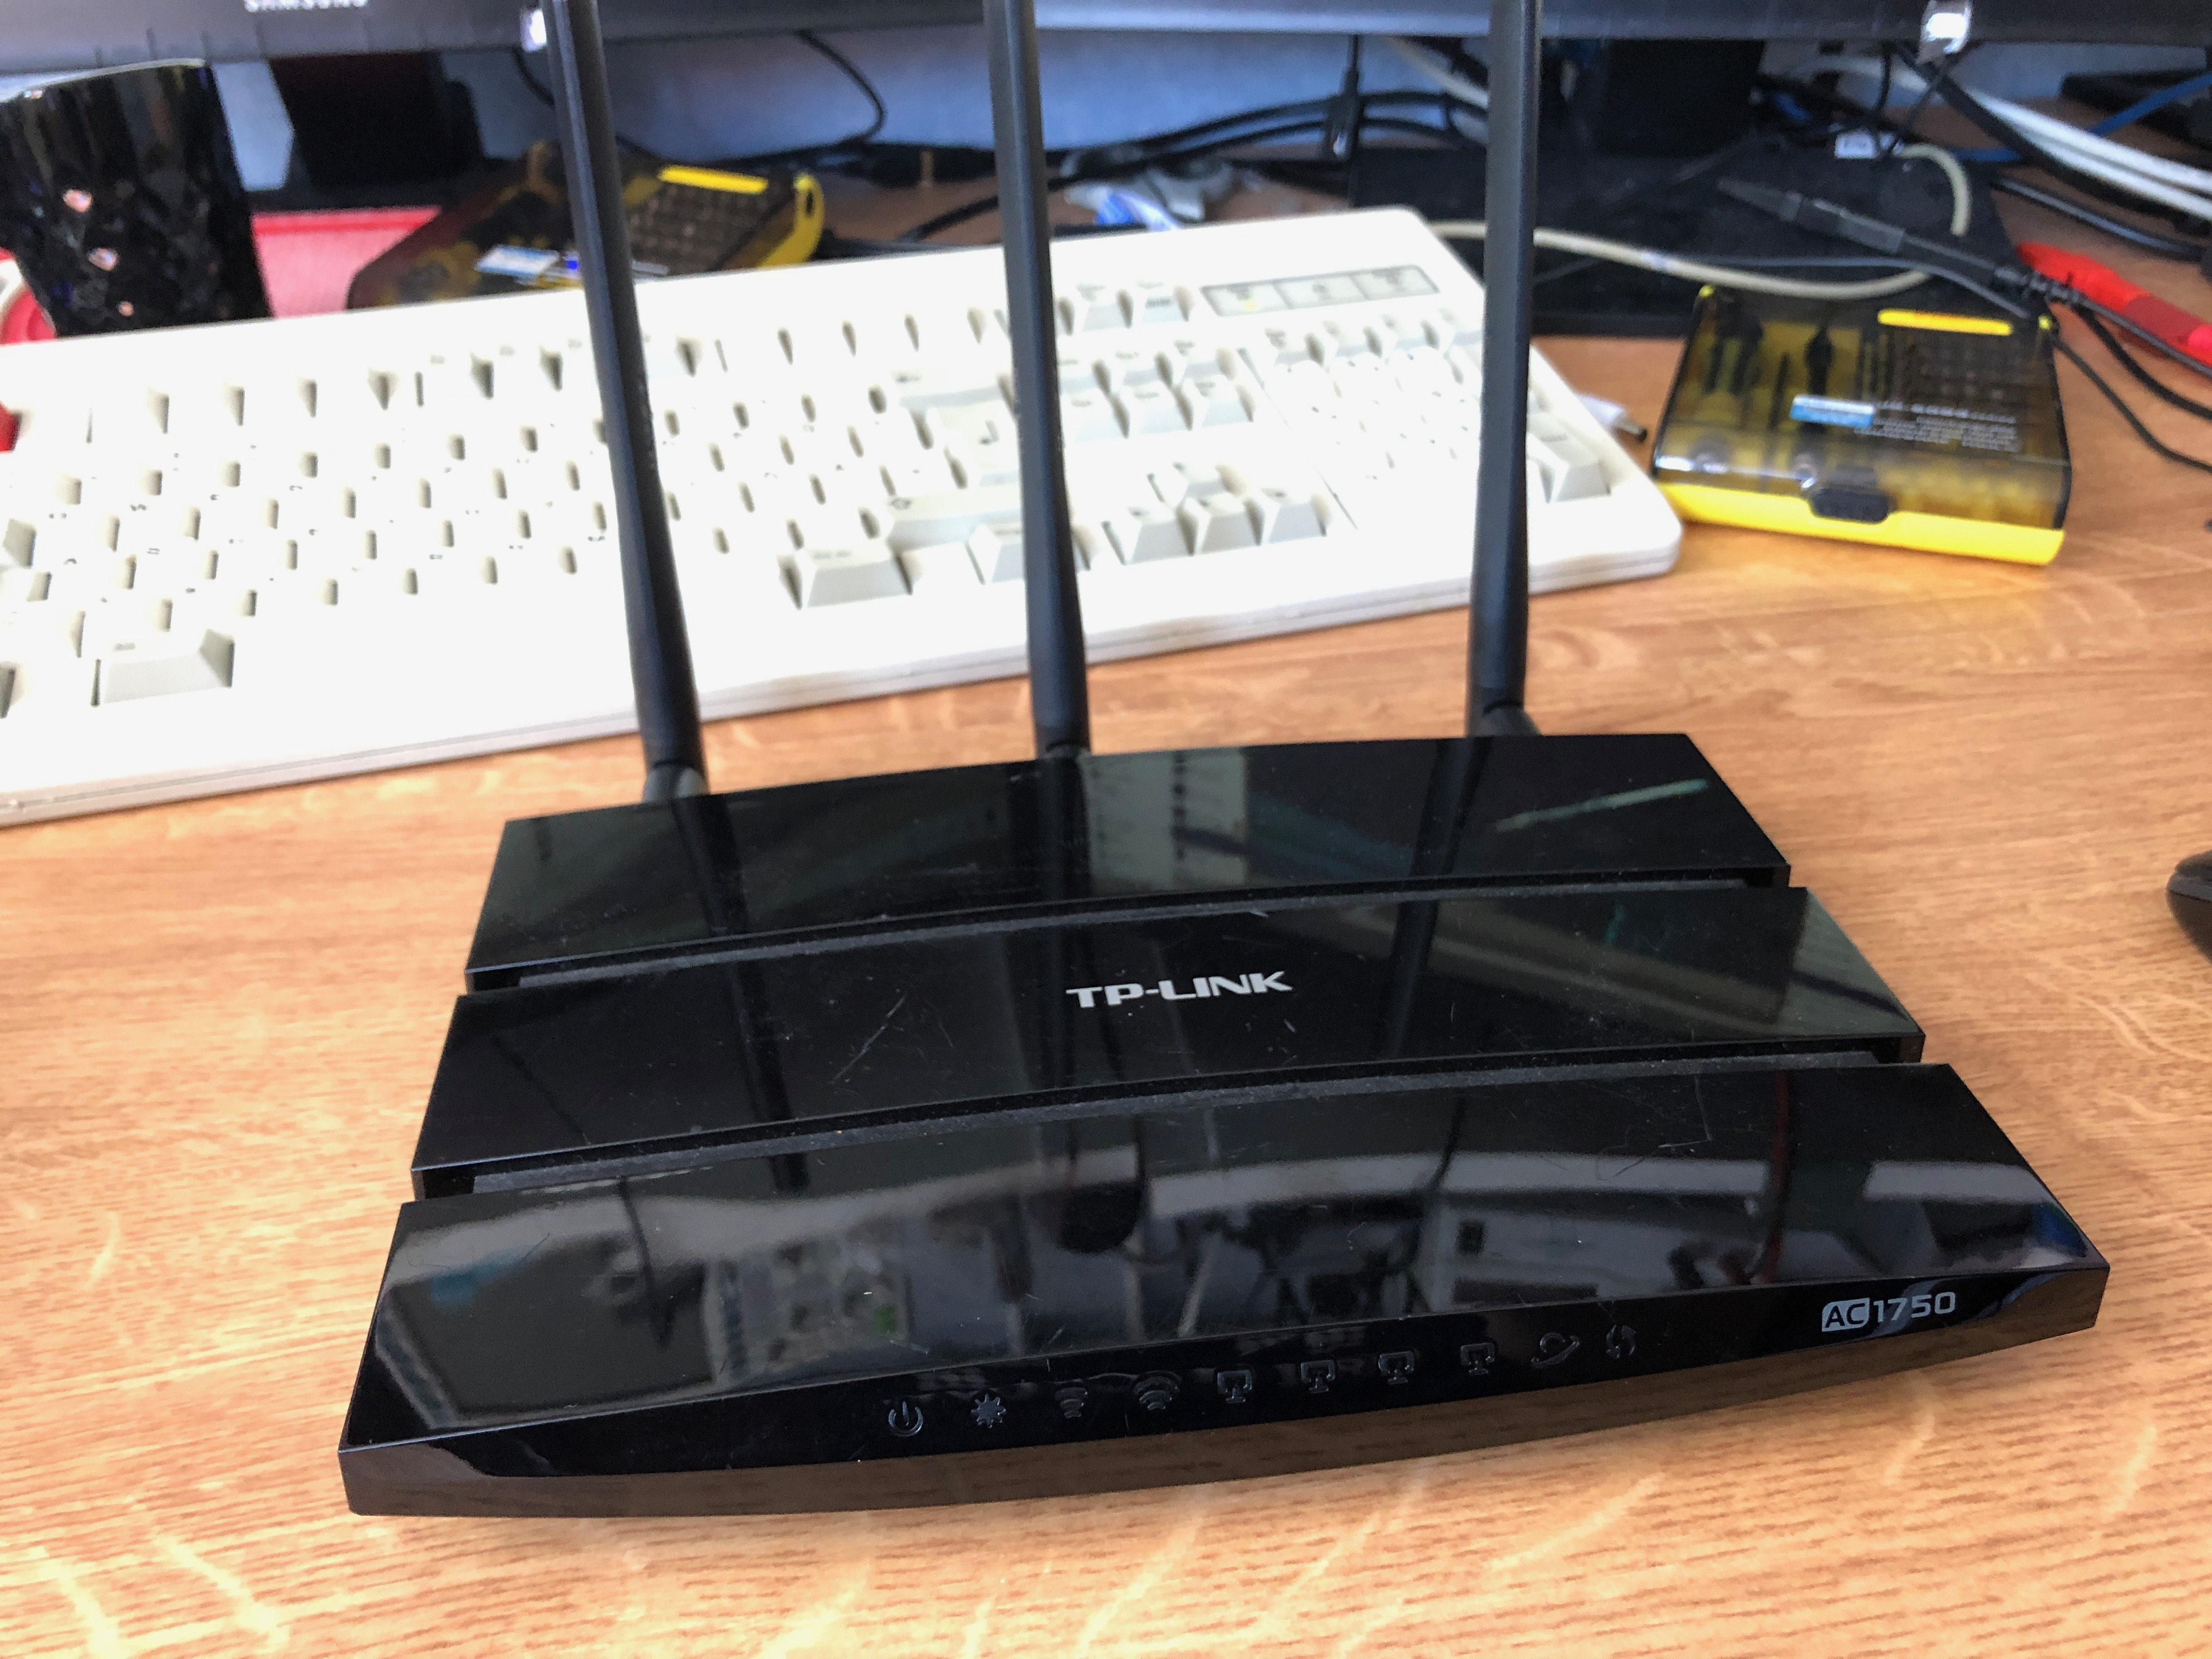 AC1750 wifi router